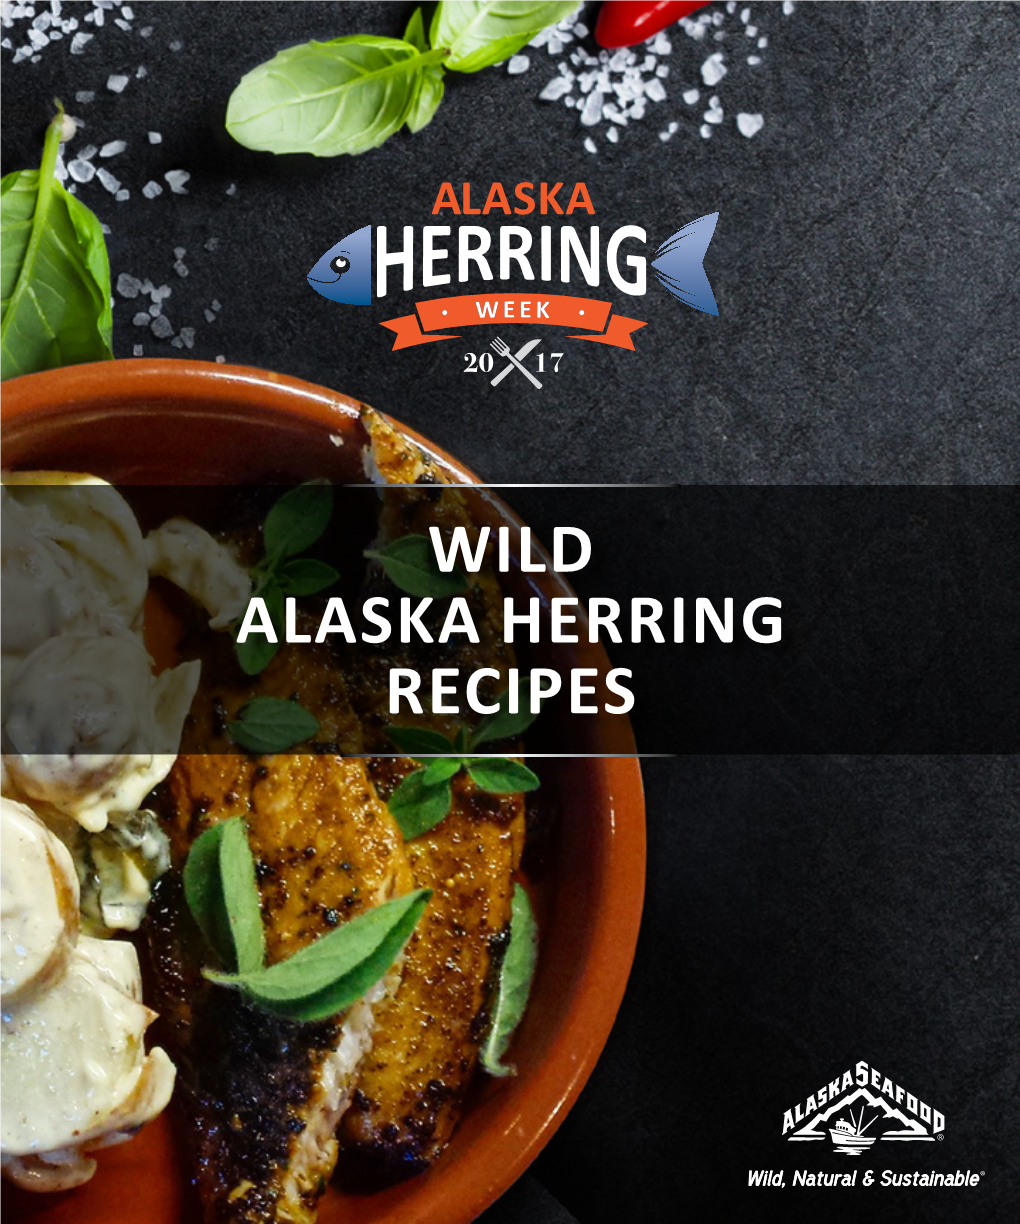 WILD ALASKA HERRING RECIPES Wild Alaska Herring Is Affordable, Delicious and Nutritious